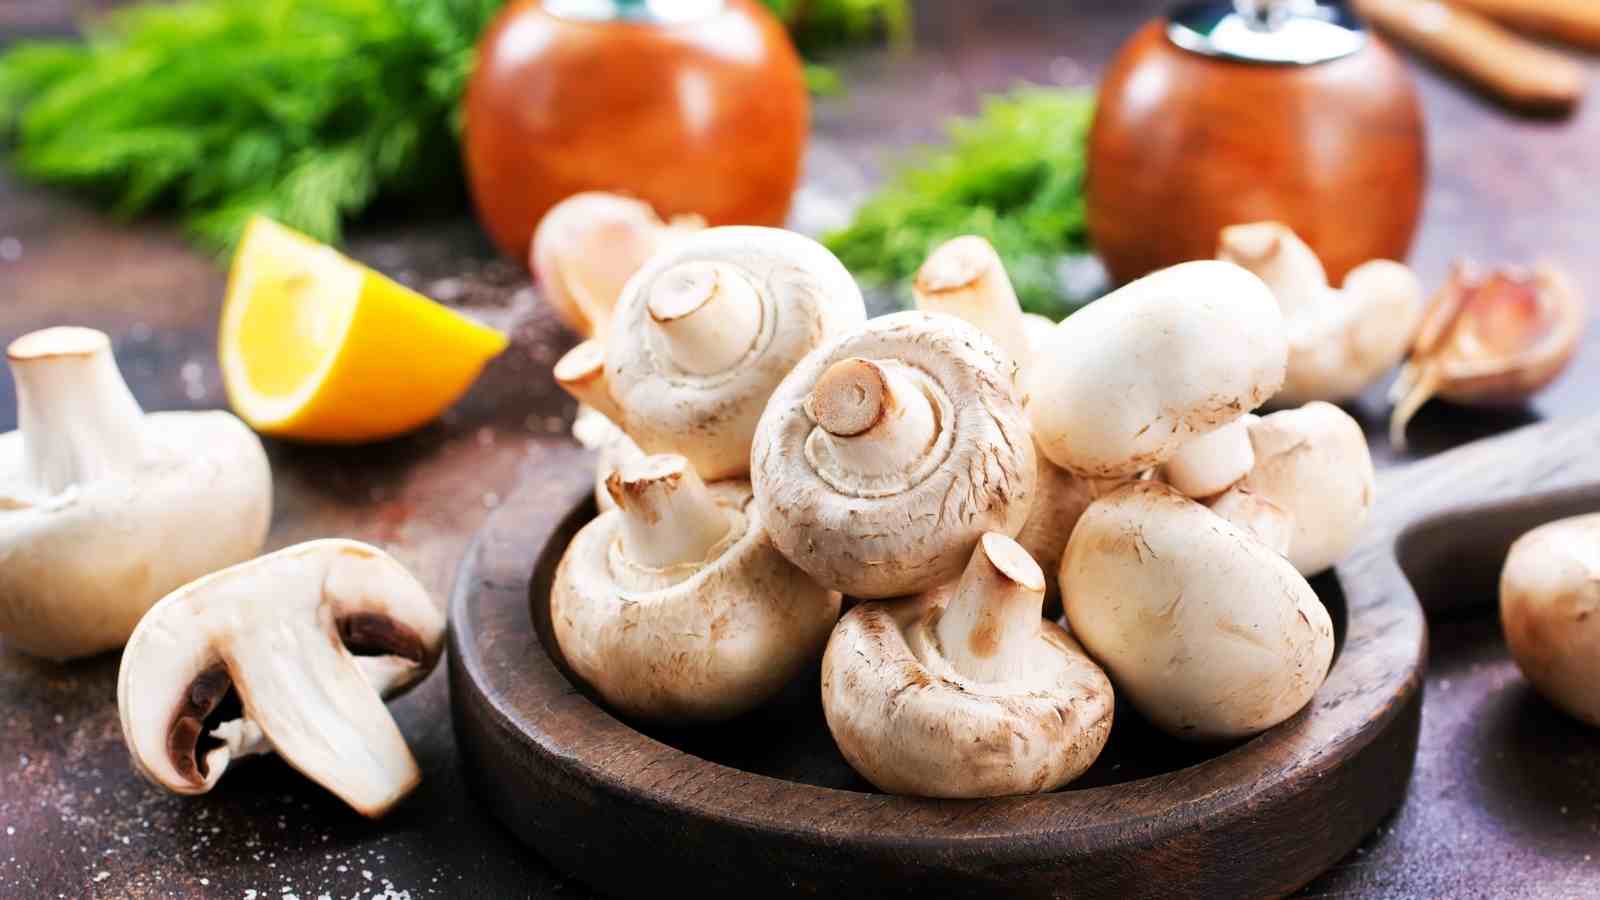 Mushrooms What Health Benefits do They Provide